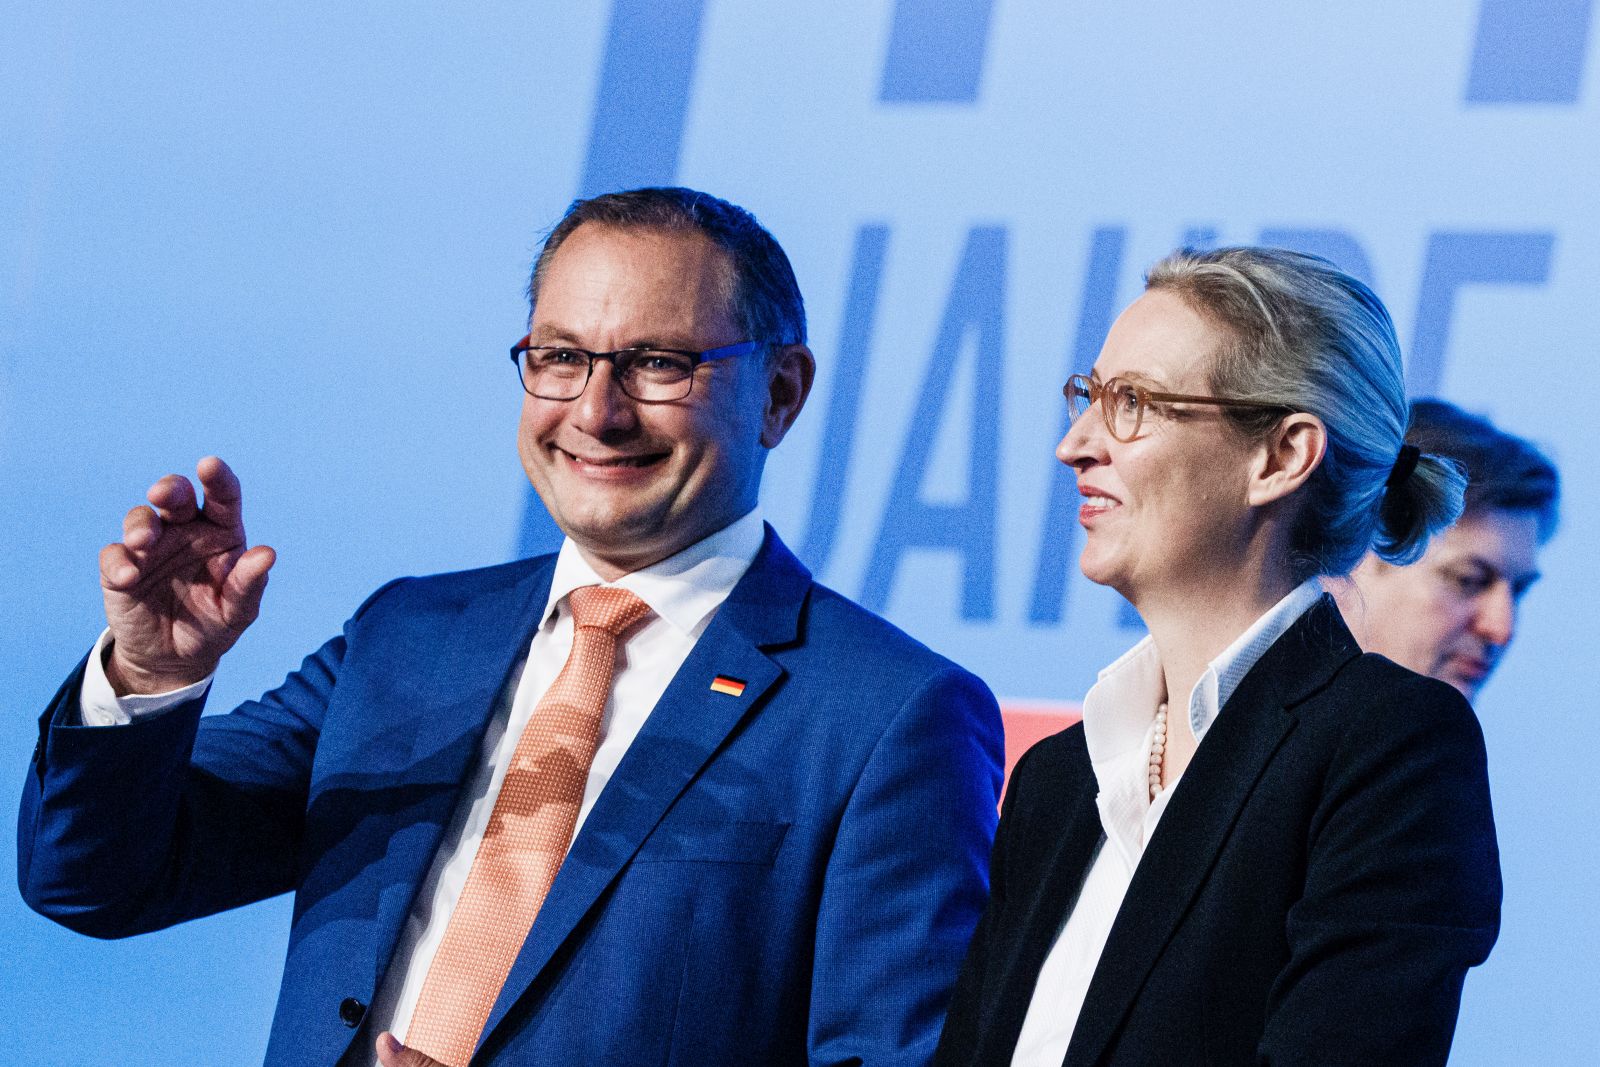 epa10773035 Alternative for Germany (AfD) party co-chairman and spokesman Tino Chrupalla (L) waves next to AfD deputy chairwoman Alice Weidel during the AfD party convention in Magdeburg, Germany, 28 July 2023. The Alternative for Germany (AfD) 14th federal party congress takes place in Magdeburg on 28 July, followed by a five-day European Elections assembly.  EPA/CLEMENS BILAN